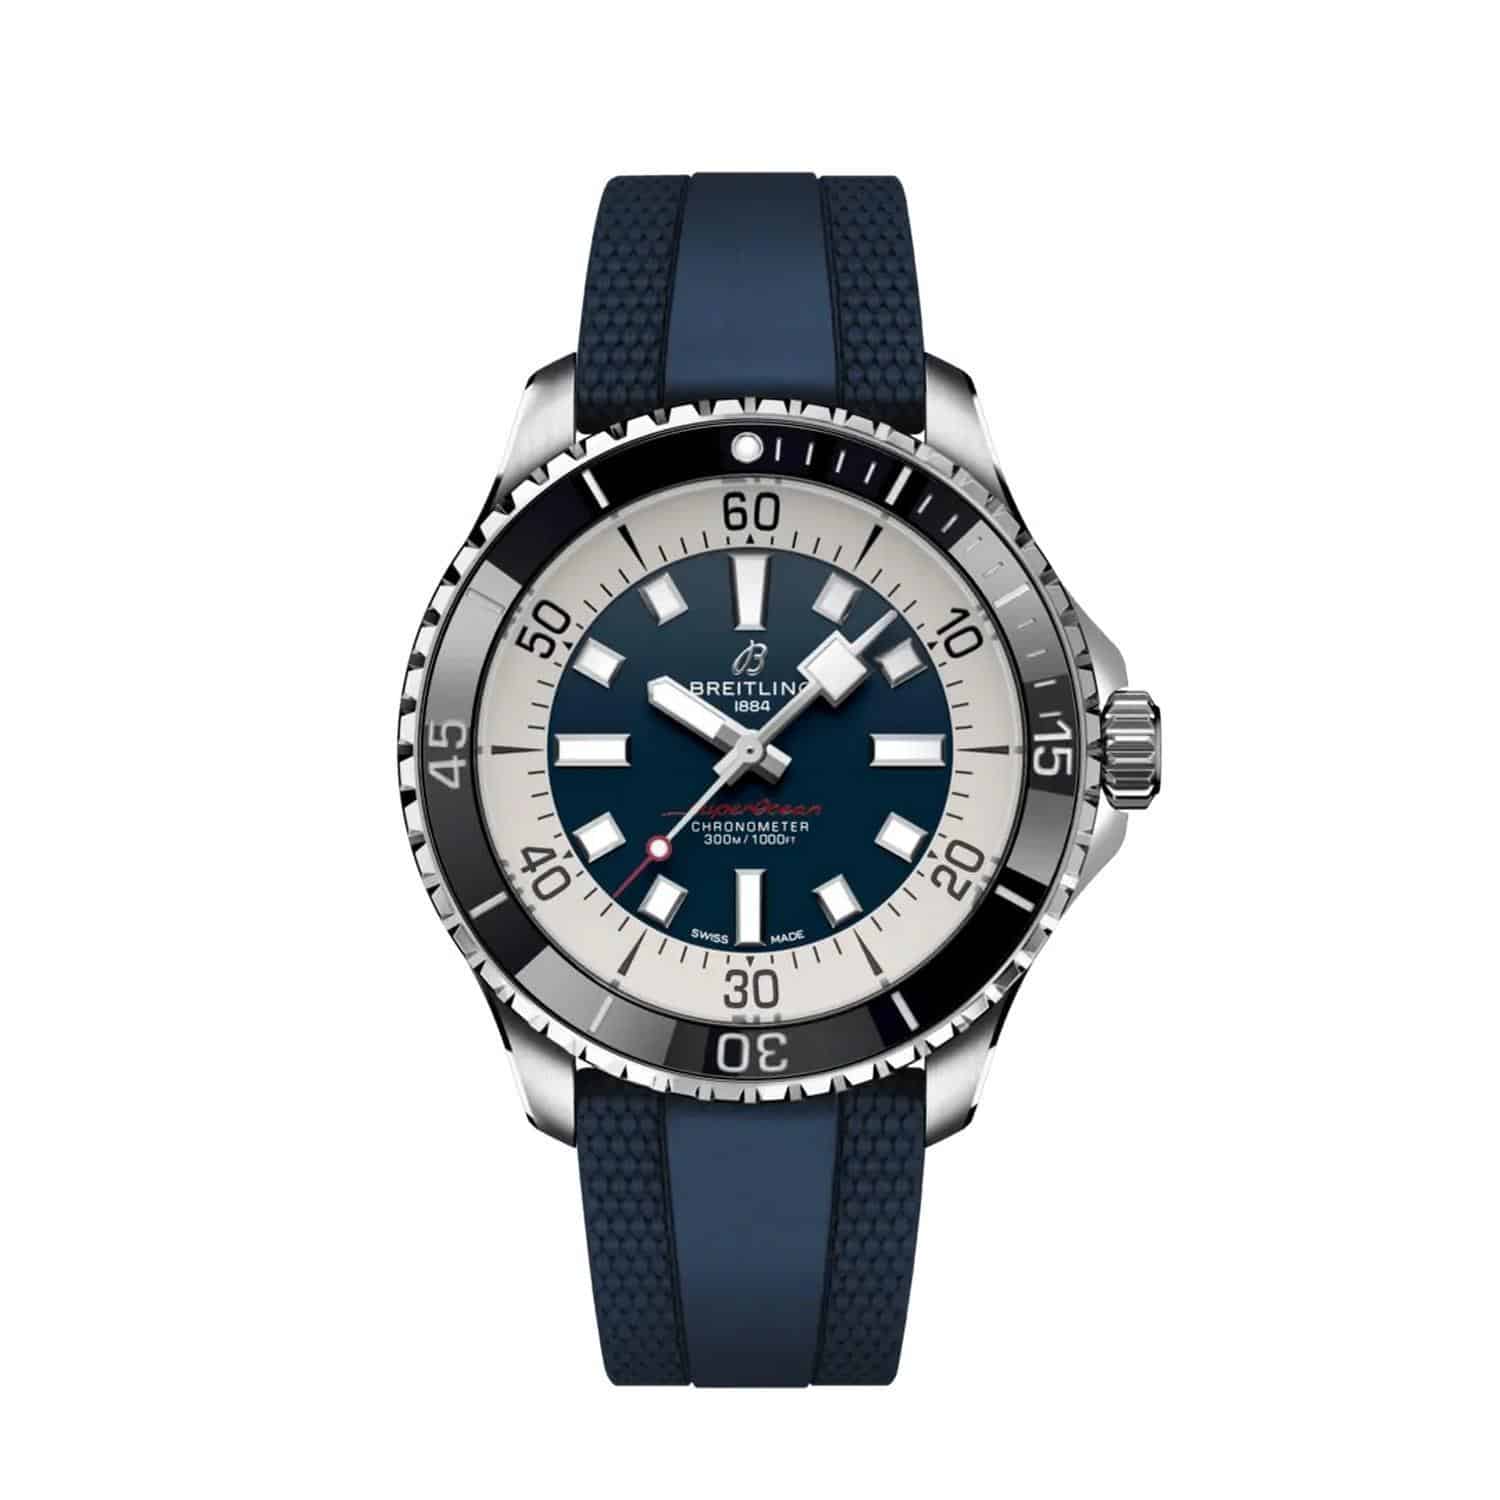 BREITLING SUPEROCEAN III AUTOMATIC 46 MM - A17378E71C1S1